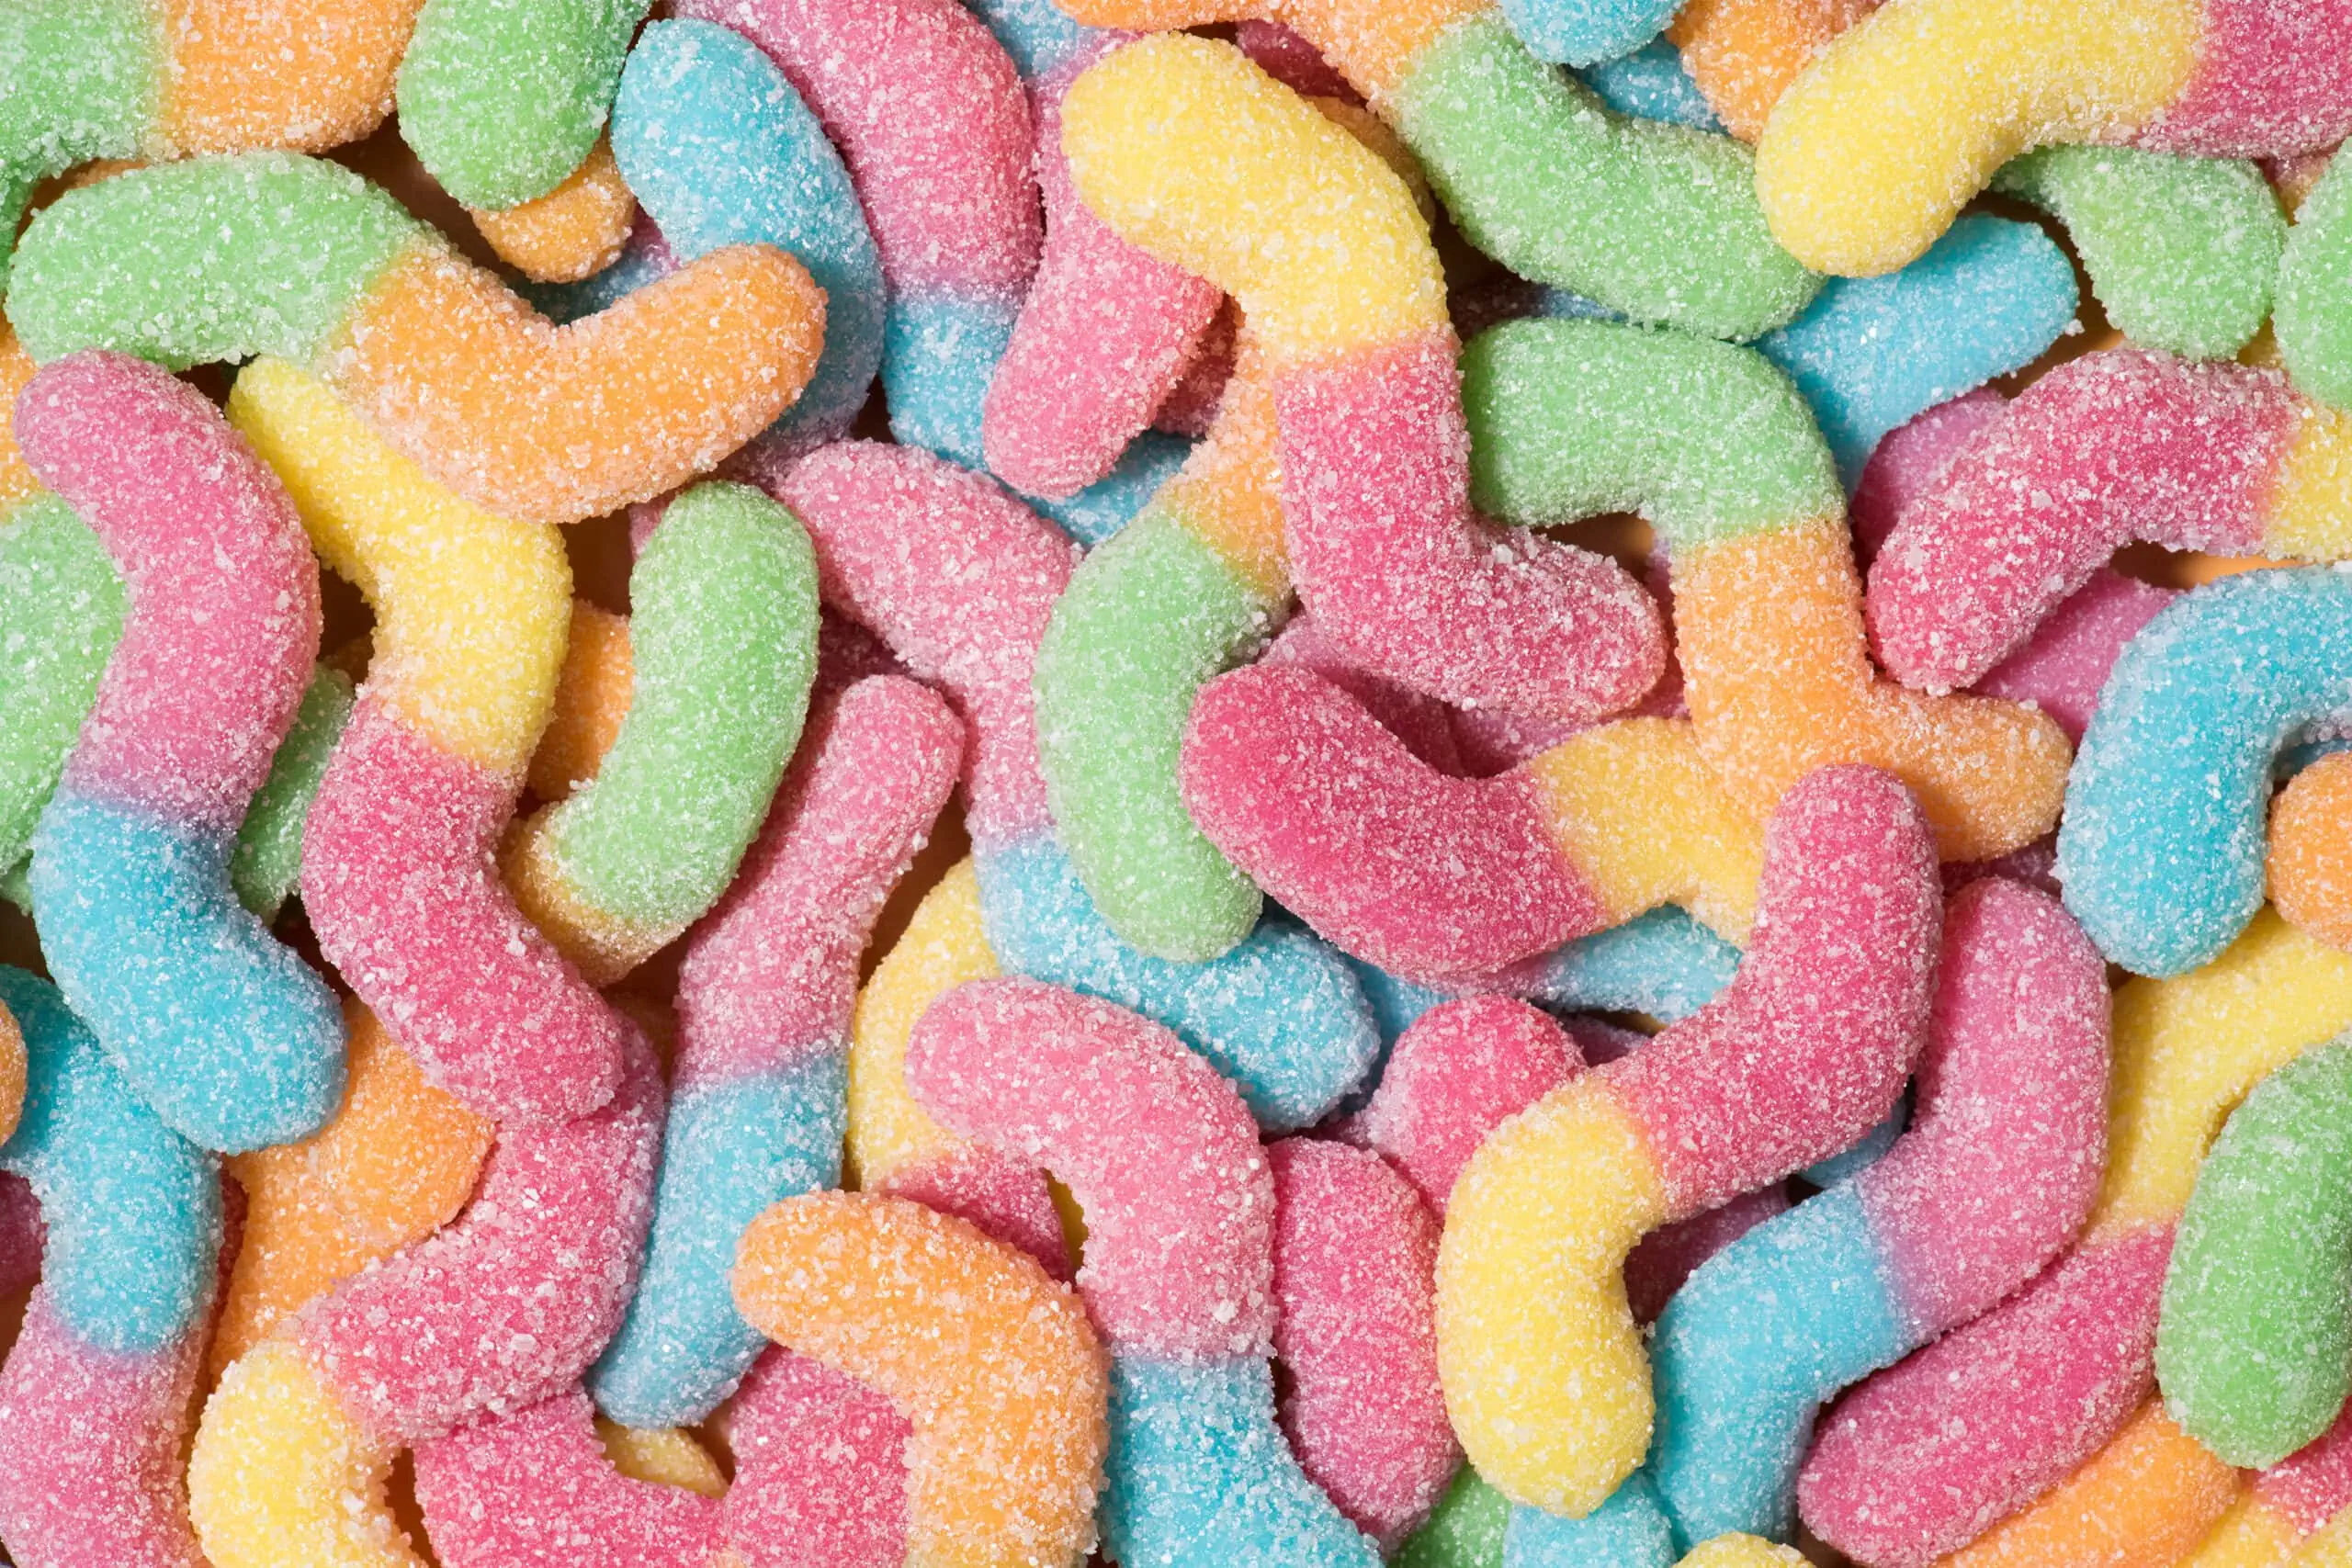 A close up of a pile of colorful HHC-R gummy worms.